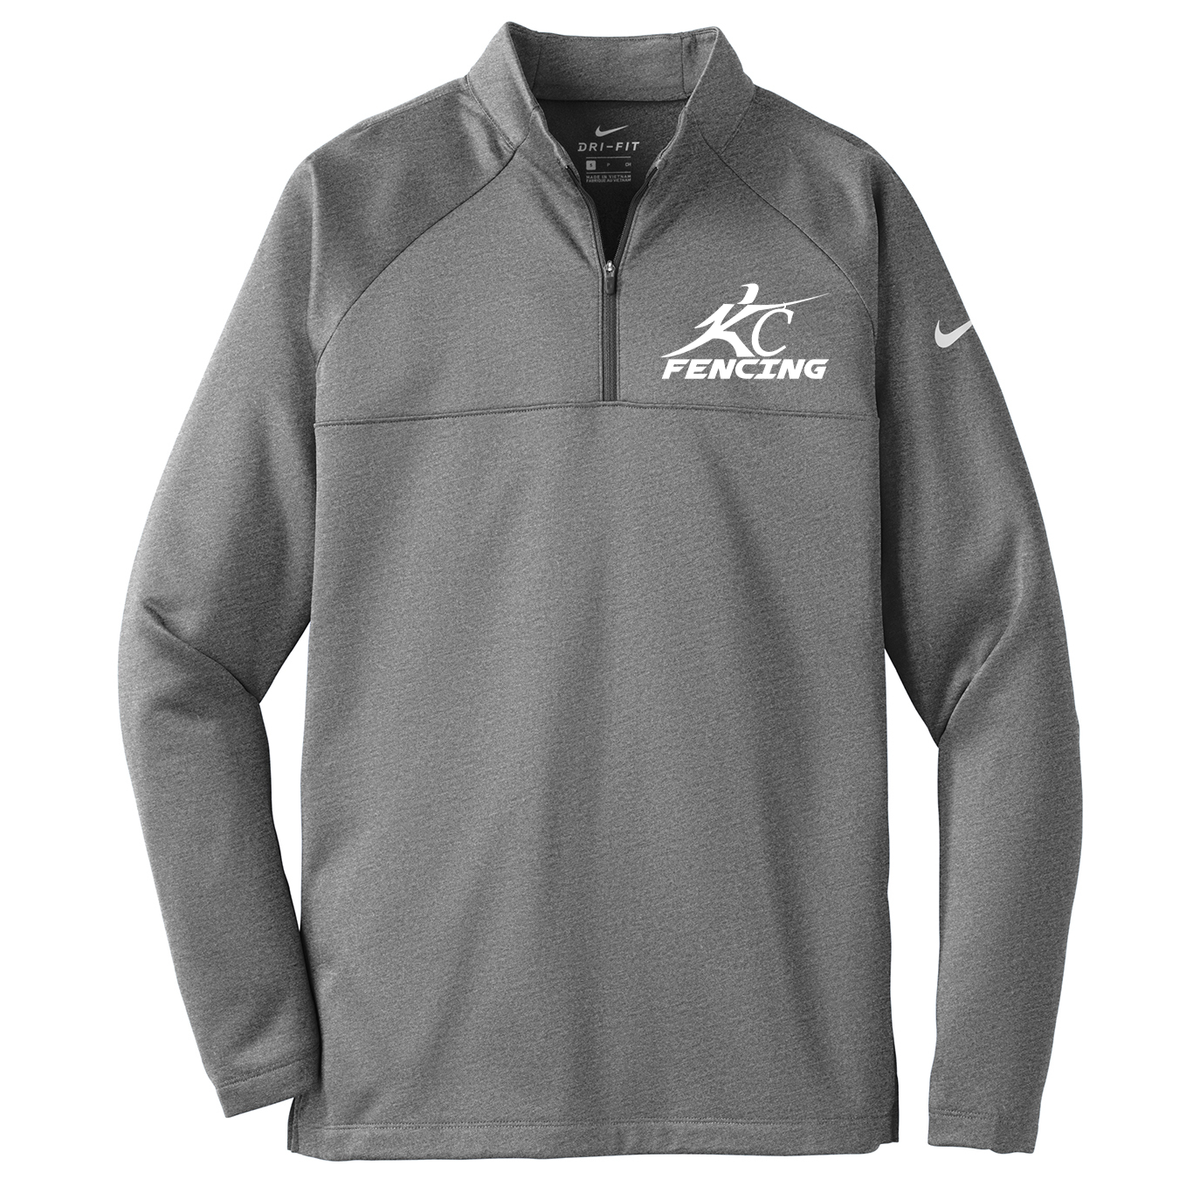 Kansas City Fencing Center Nike Therma-FIT Fleece